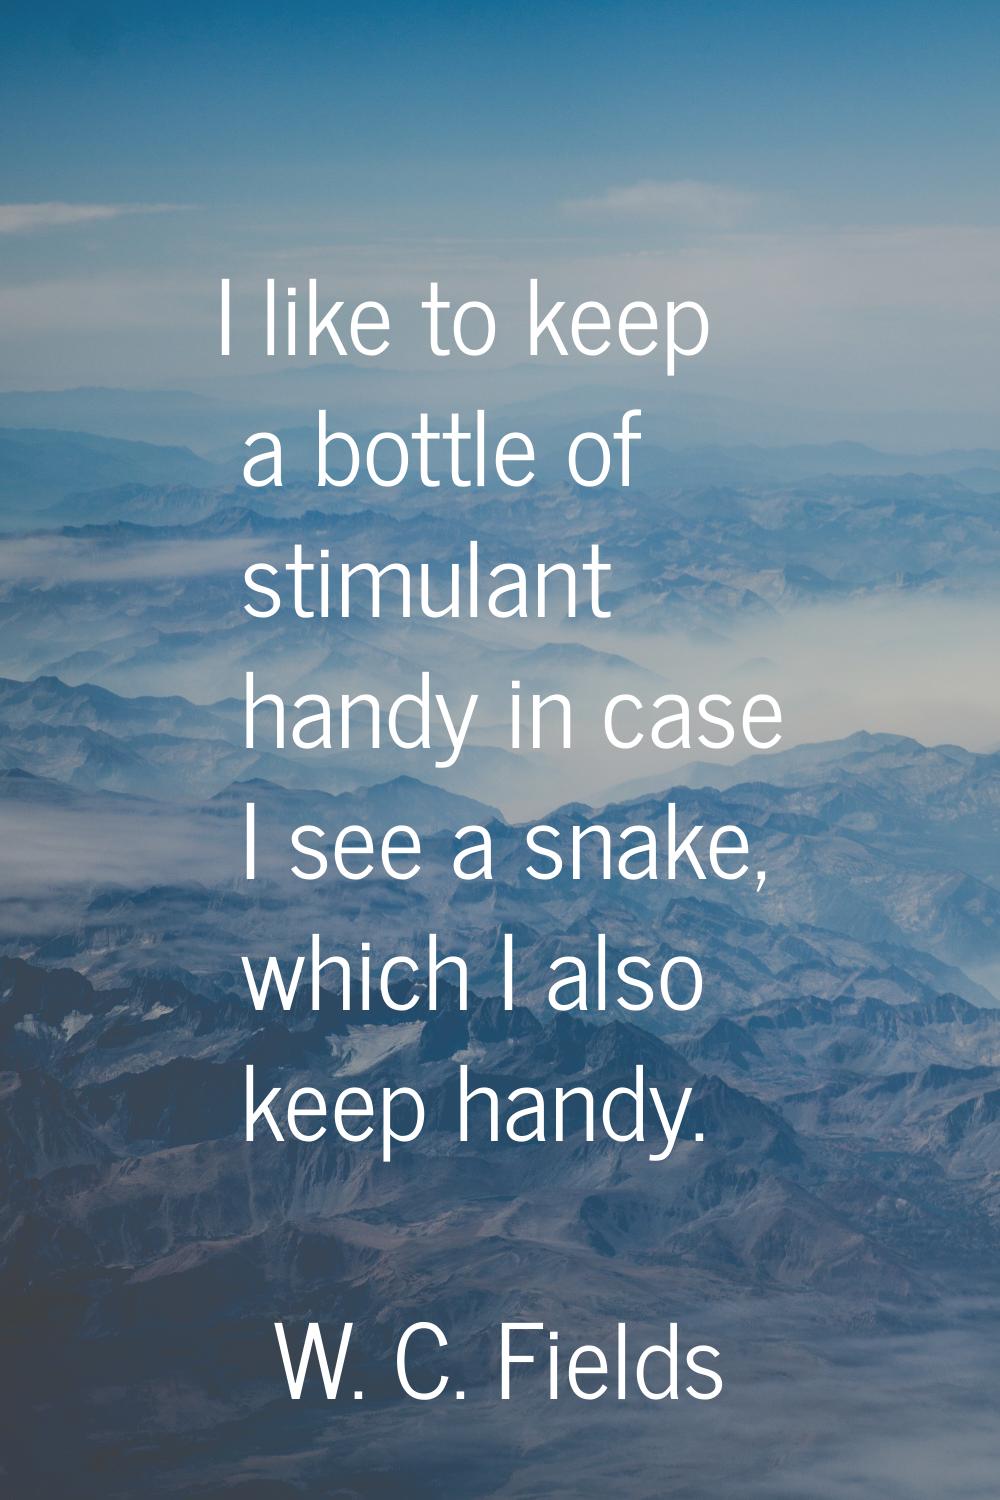 I like to keep a bottle of stimulant handy in case I see a snake, which I also keep handy.